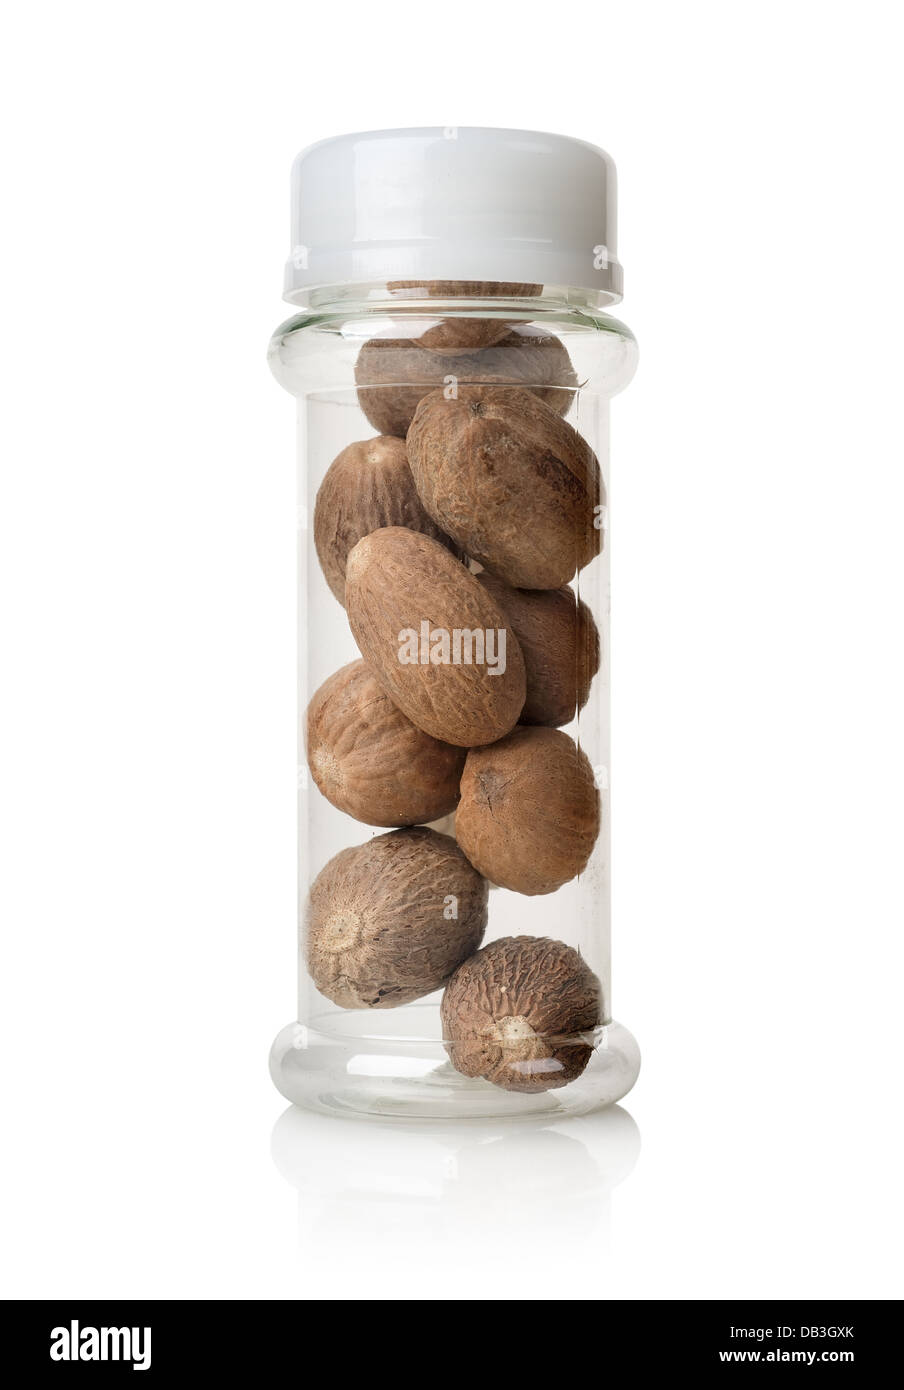 Nutmegs in a glass jar isolated on white Stock Photo